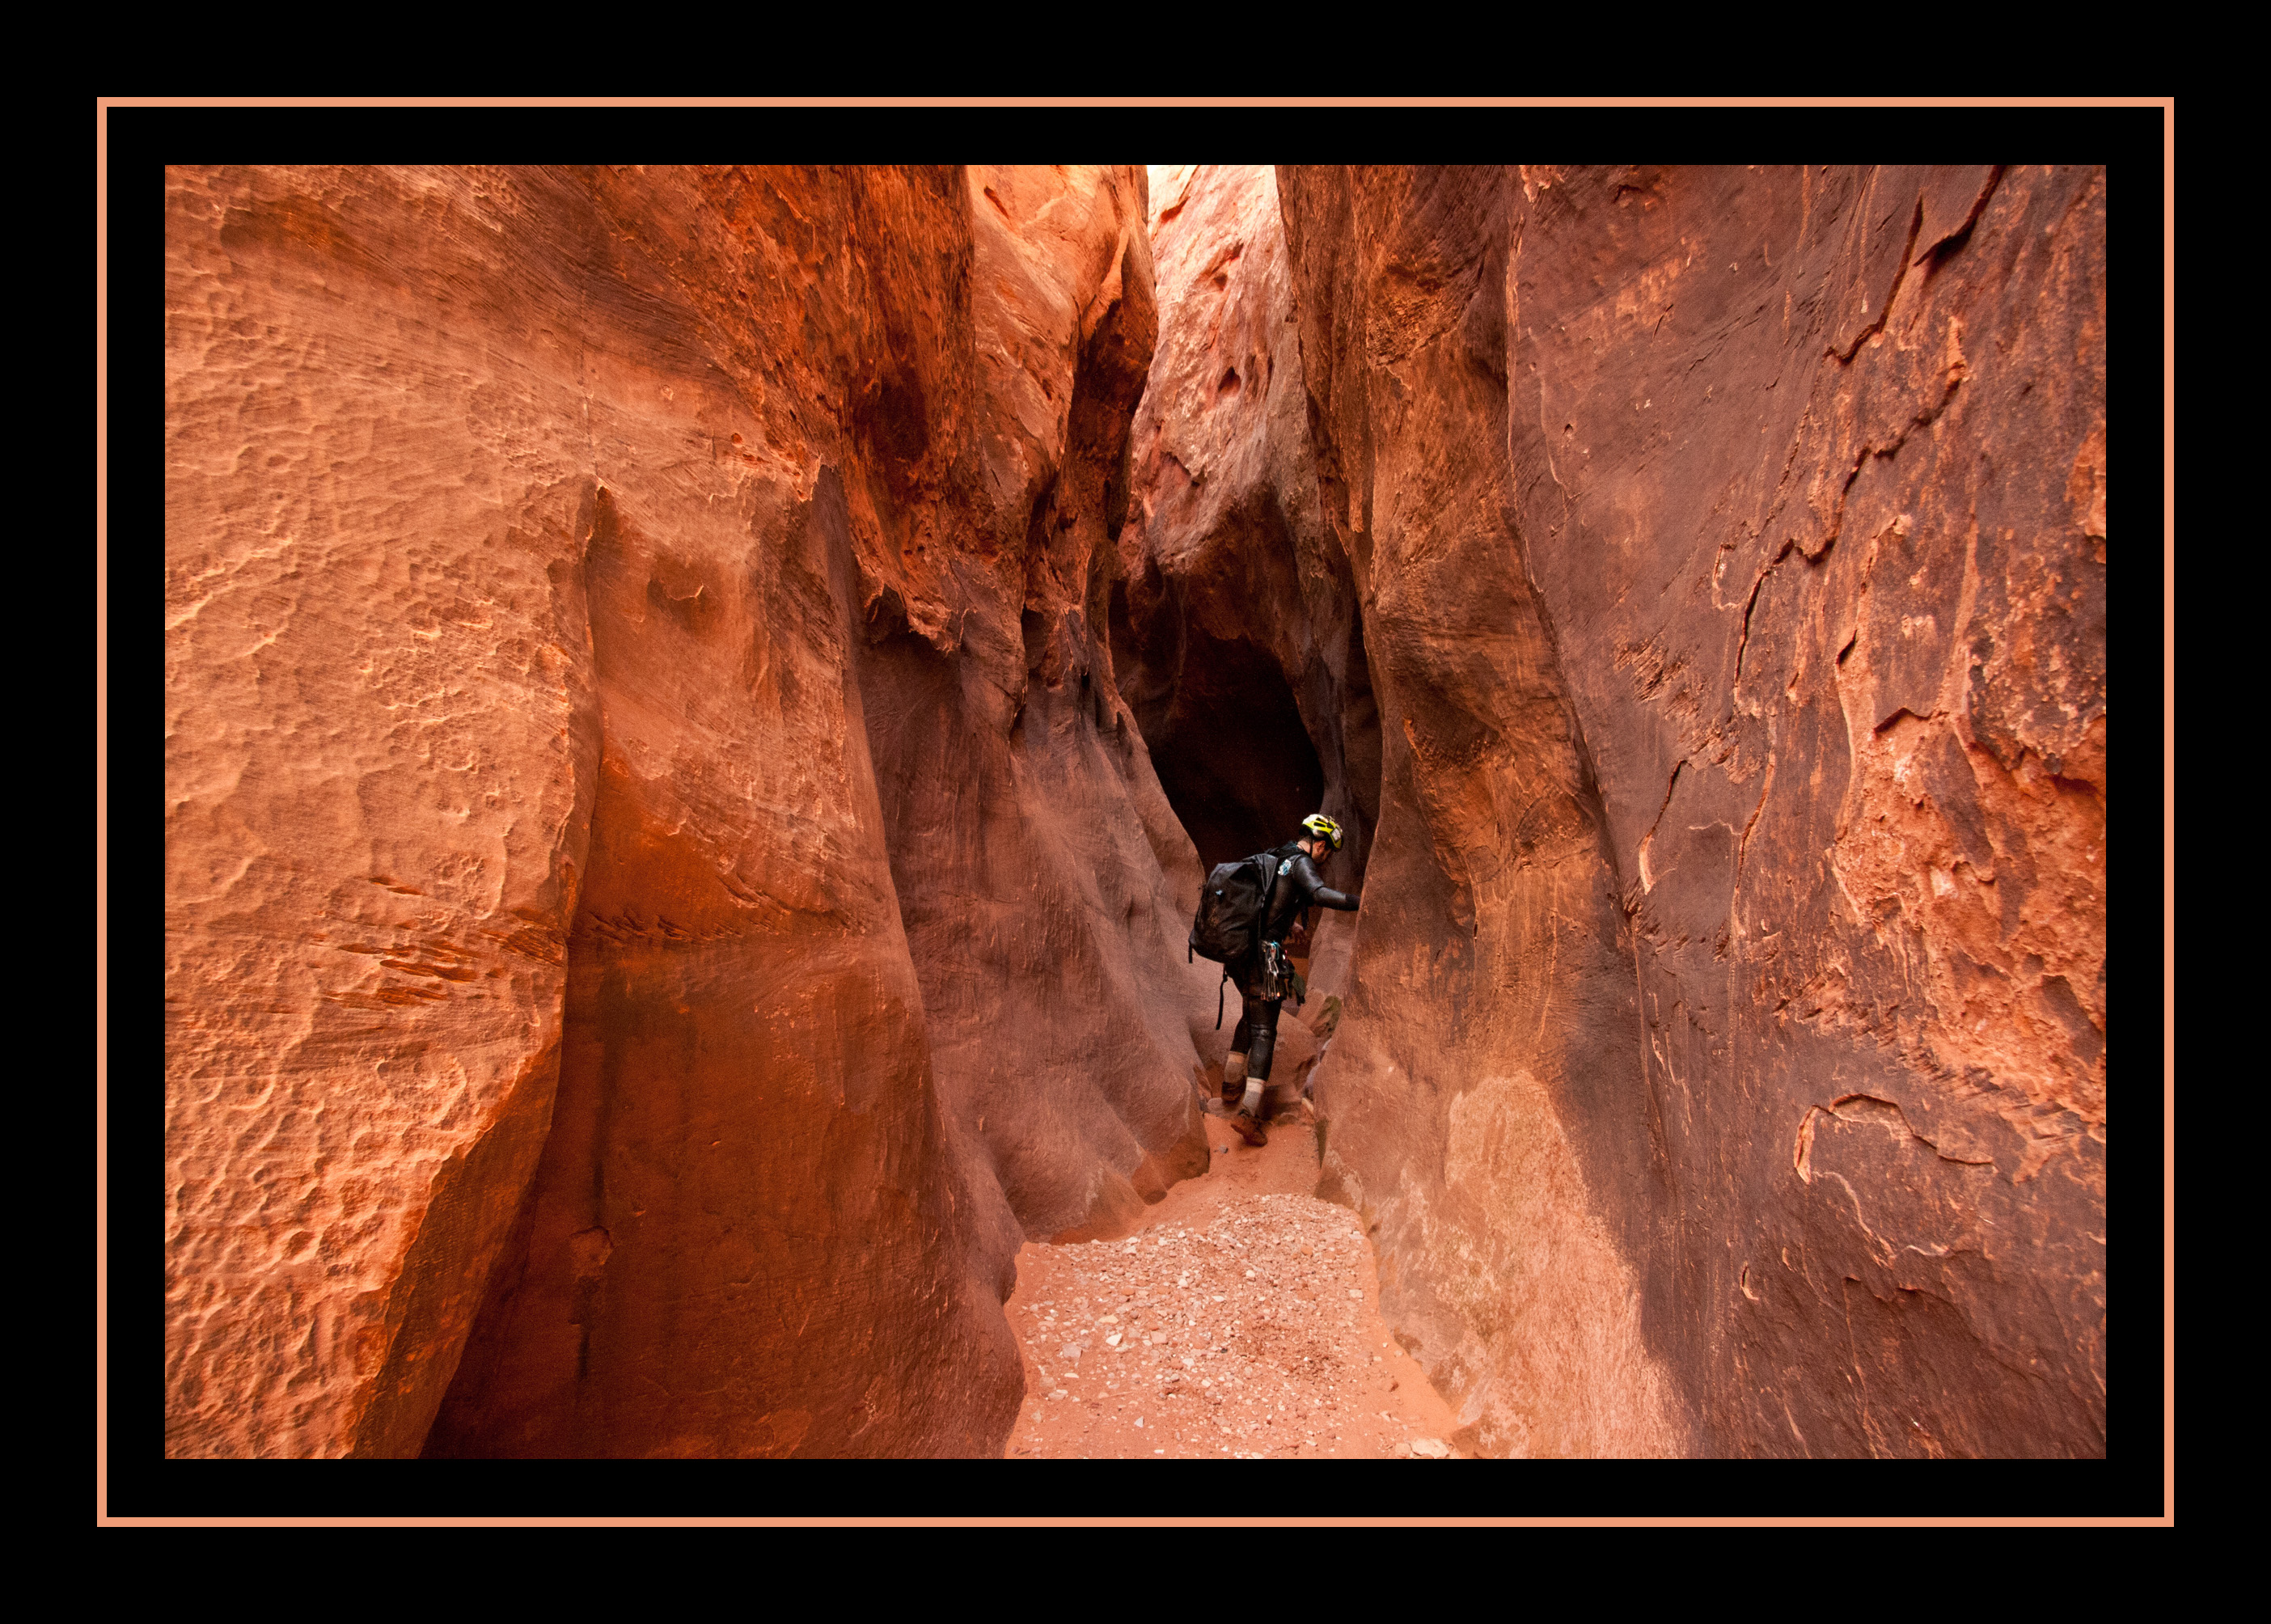 Working through the Narrows in Neon Canyon